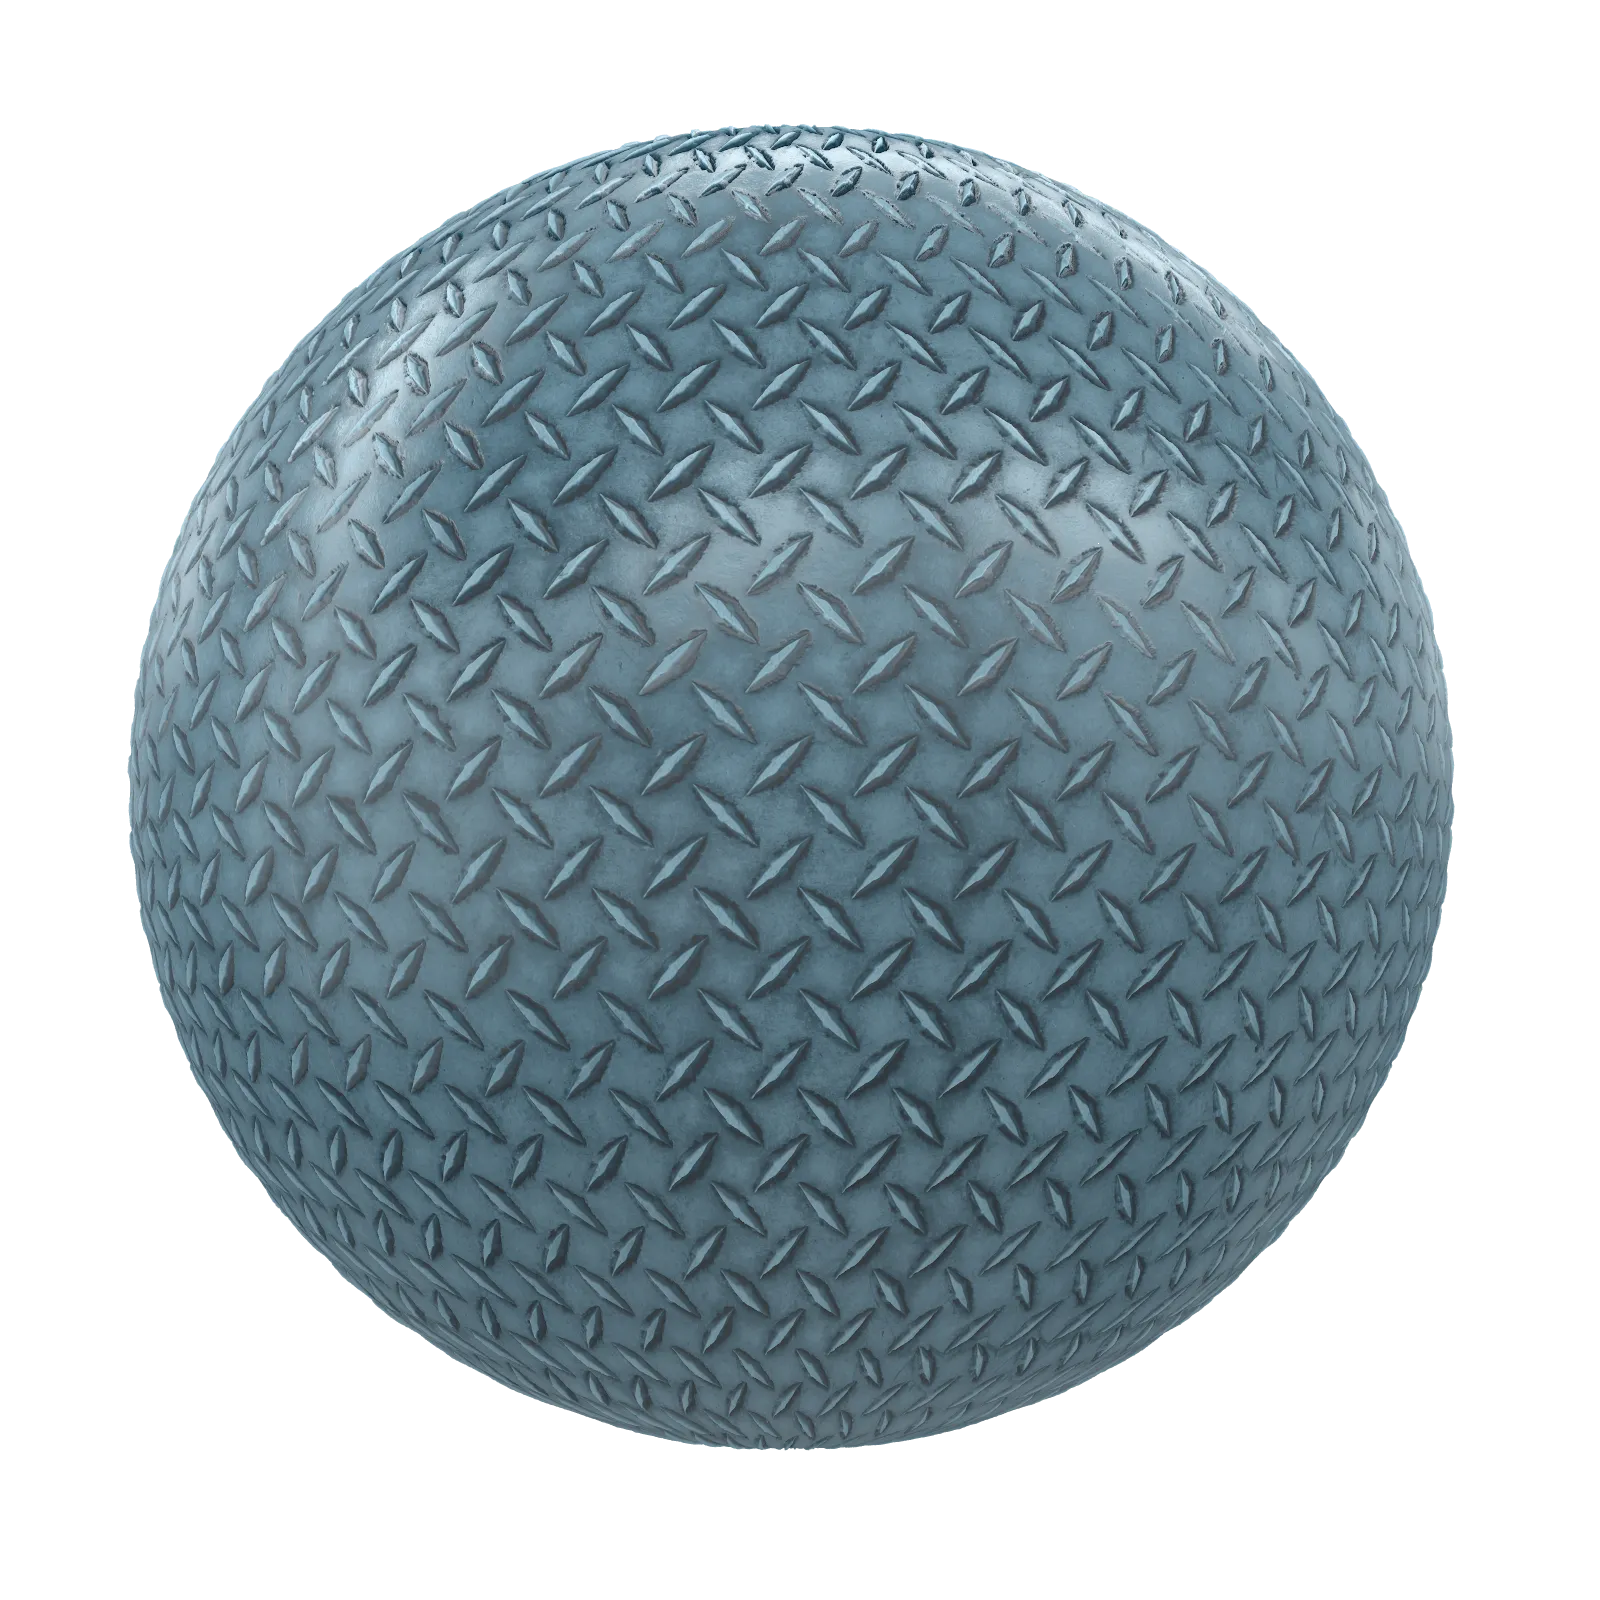 PBR CGAXIS TEXTURES – METALS – Blue Patterned Metal 01